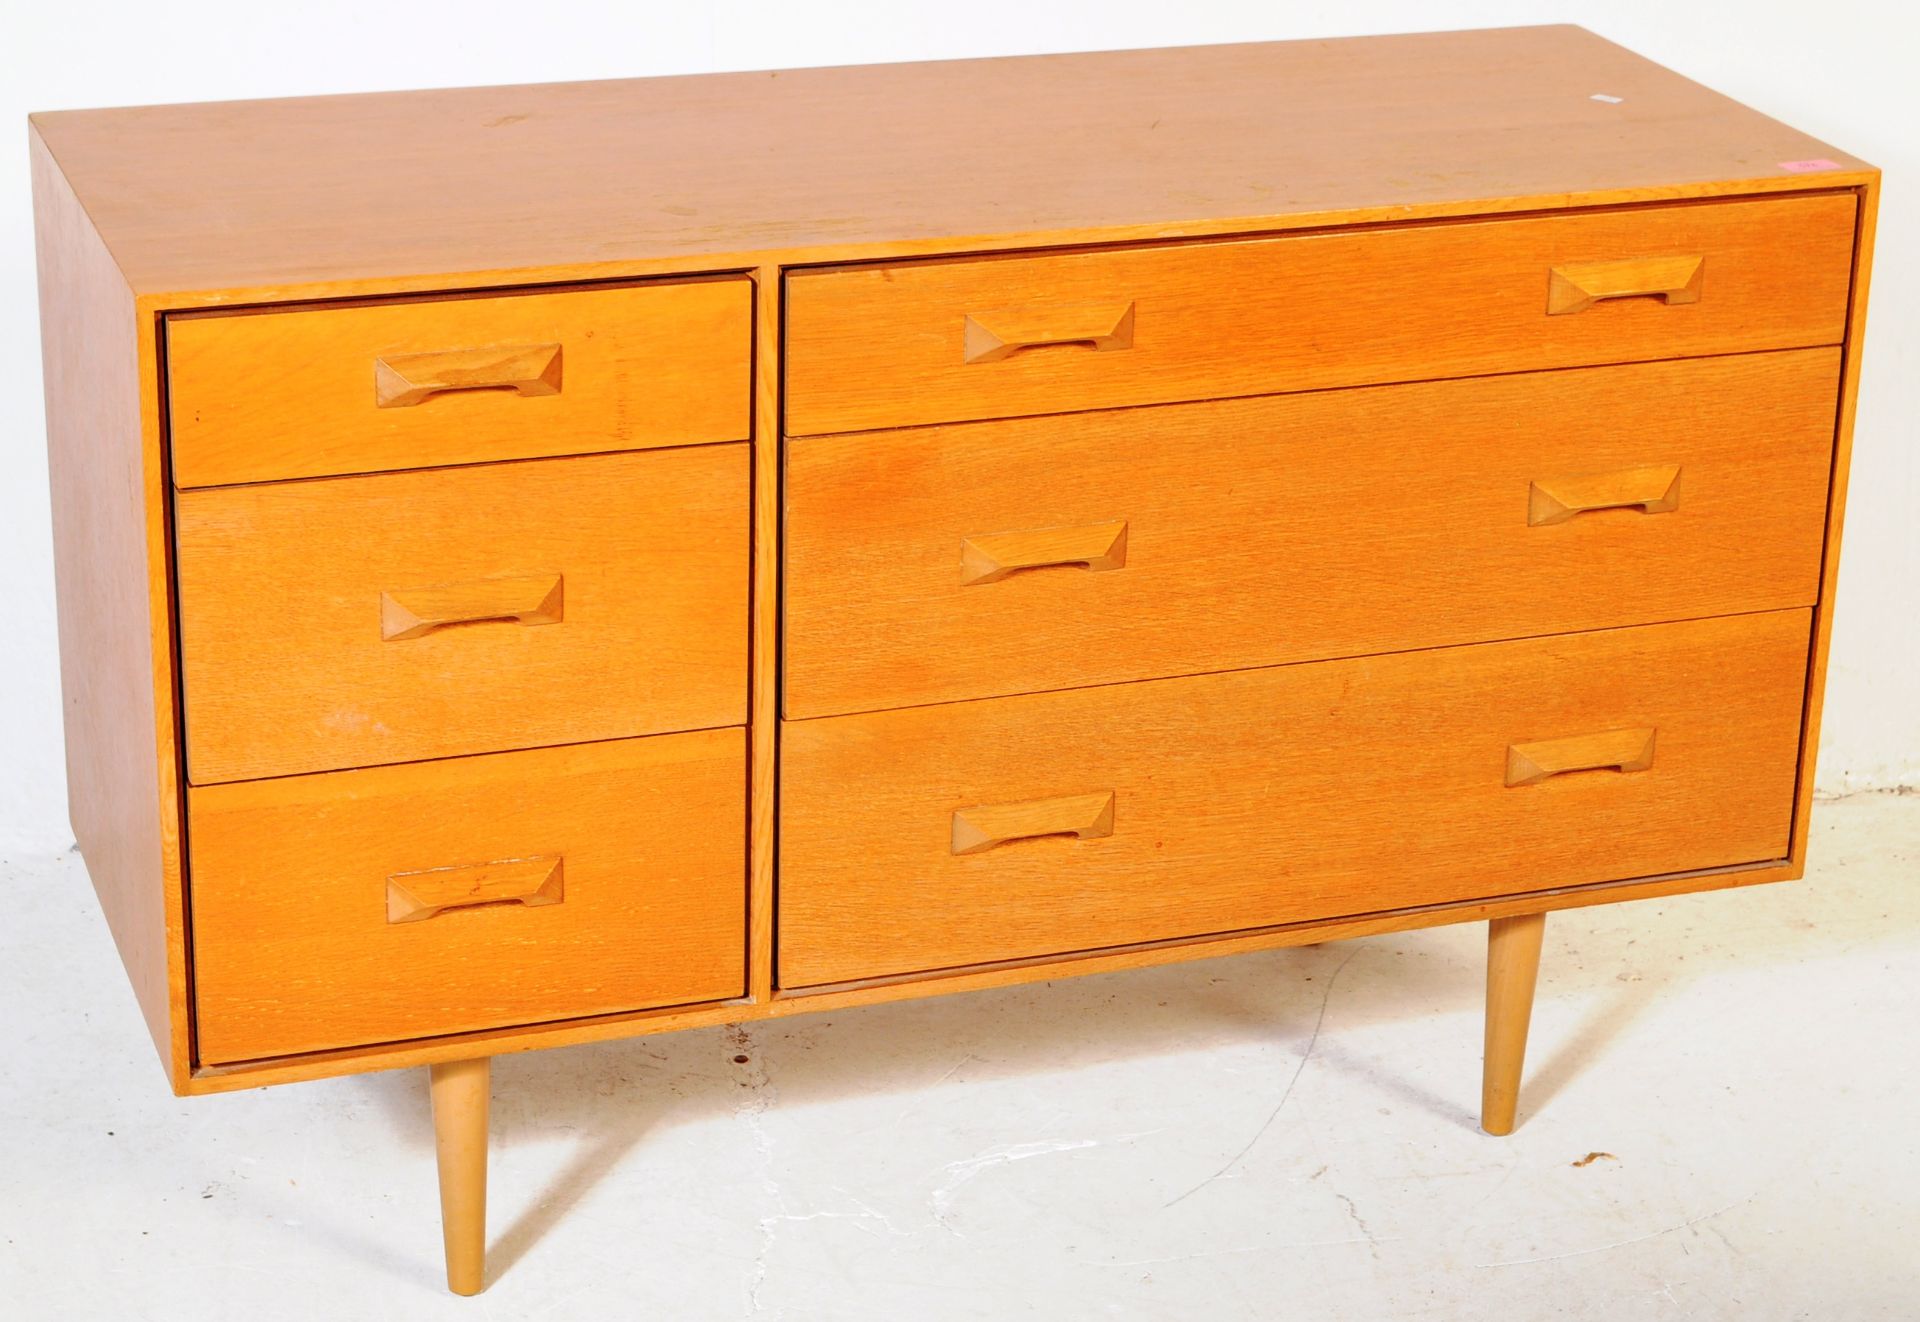 MID 20TH CENTURY STAG CONCORD RANGE OAK SIDEBOARD - Image 2 of 7